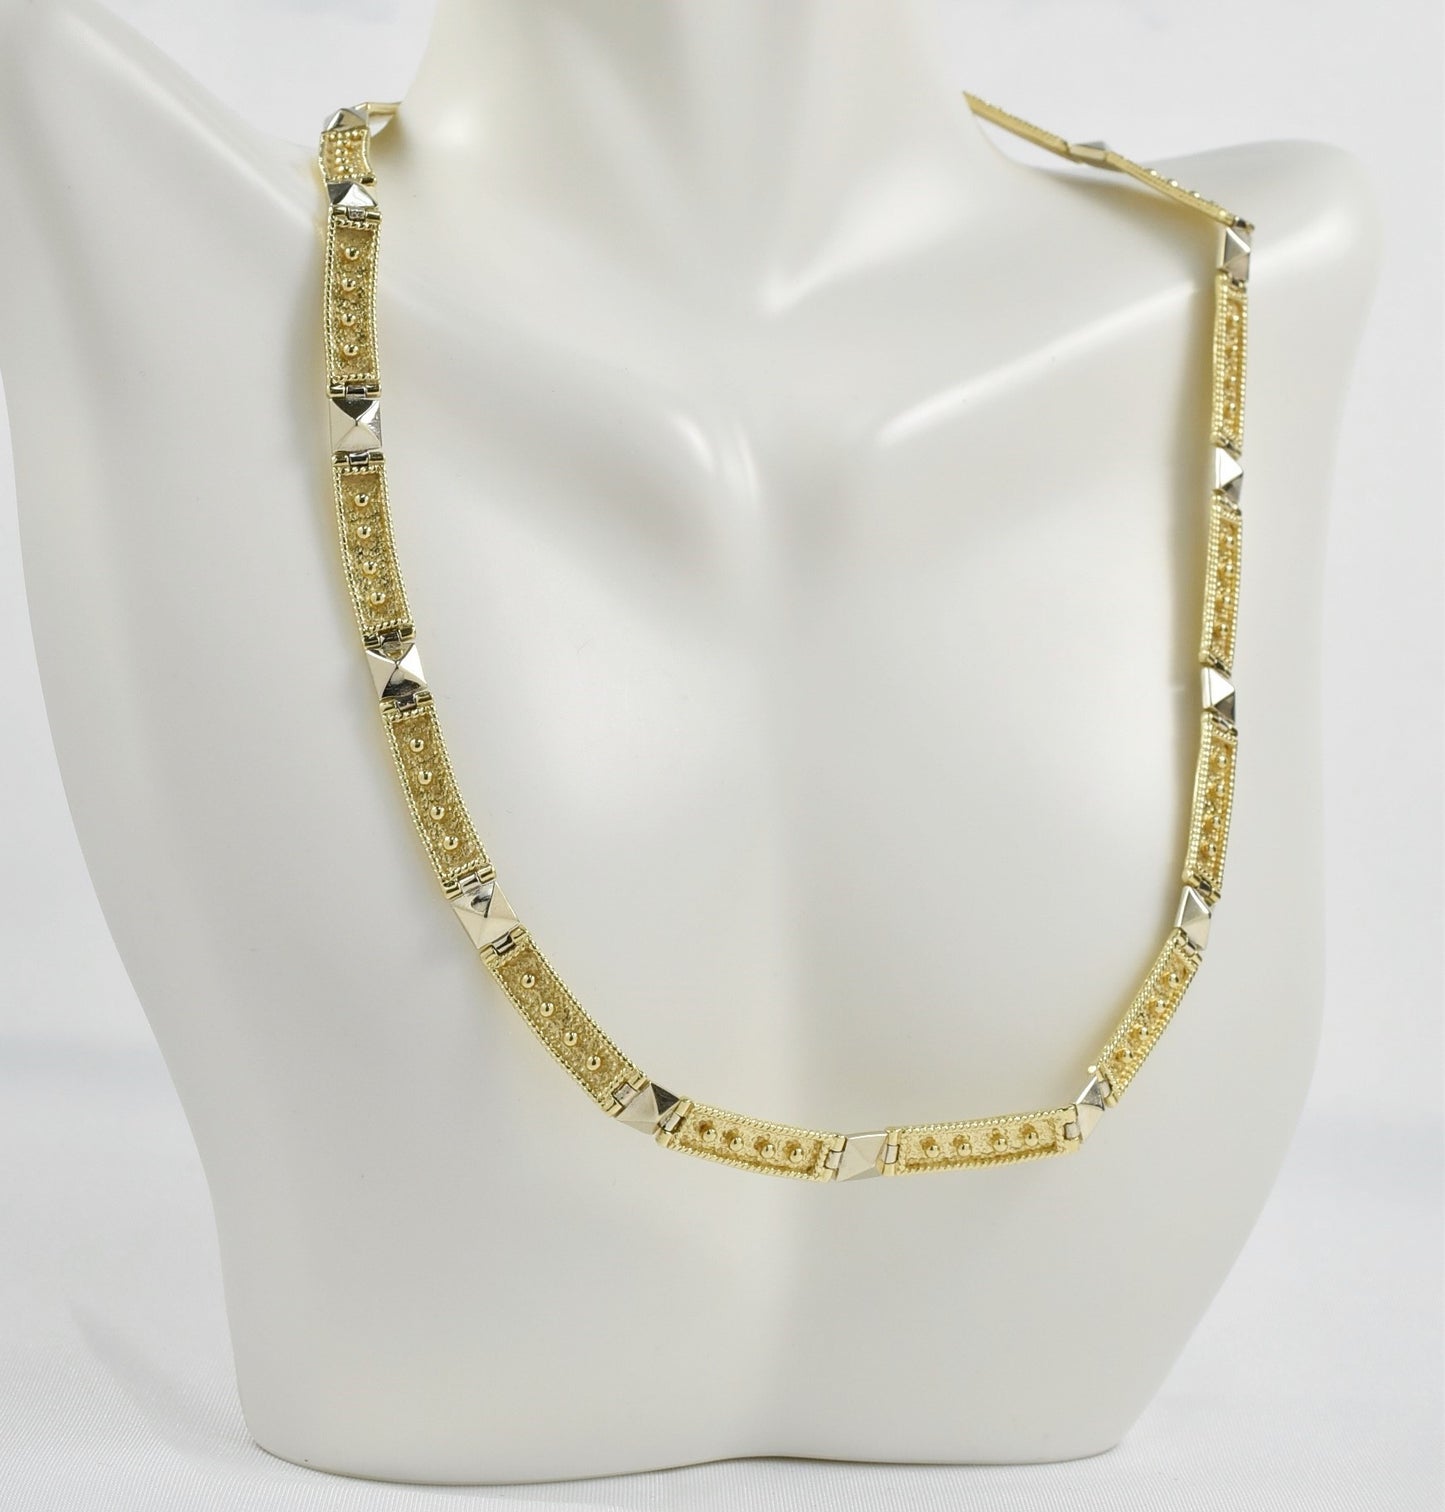 Vintage 14k Yellow & White Gold Link Choker, 16 inches - 30.0g